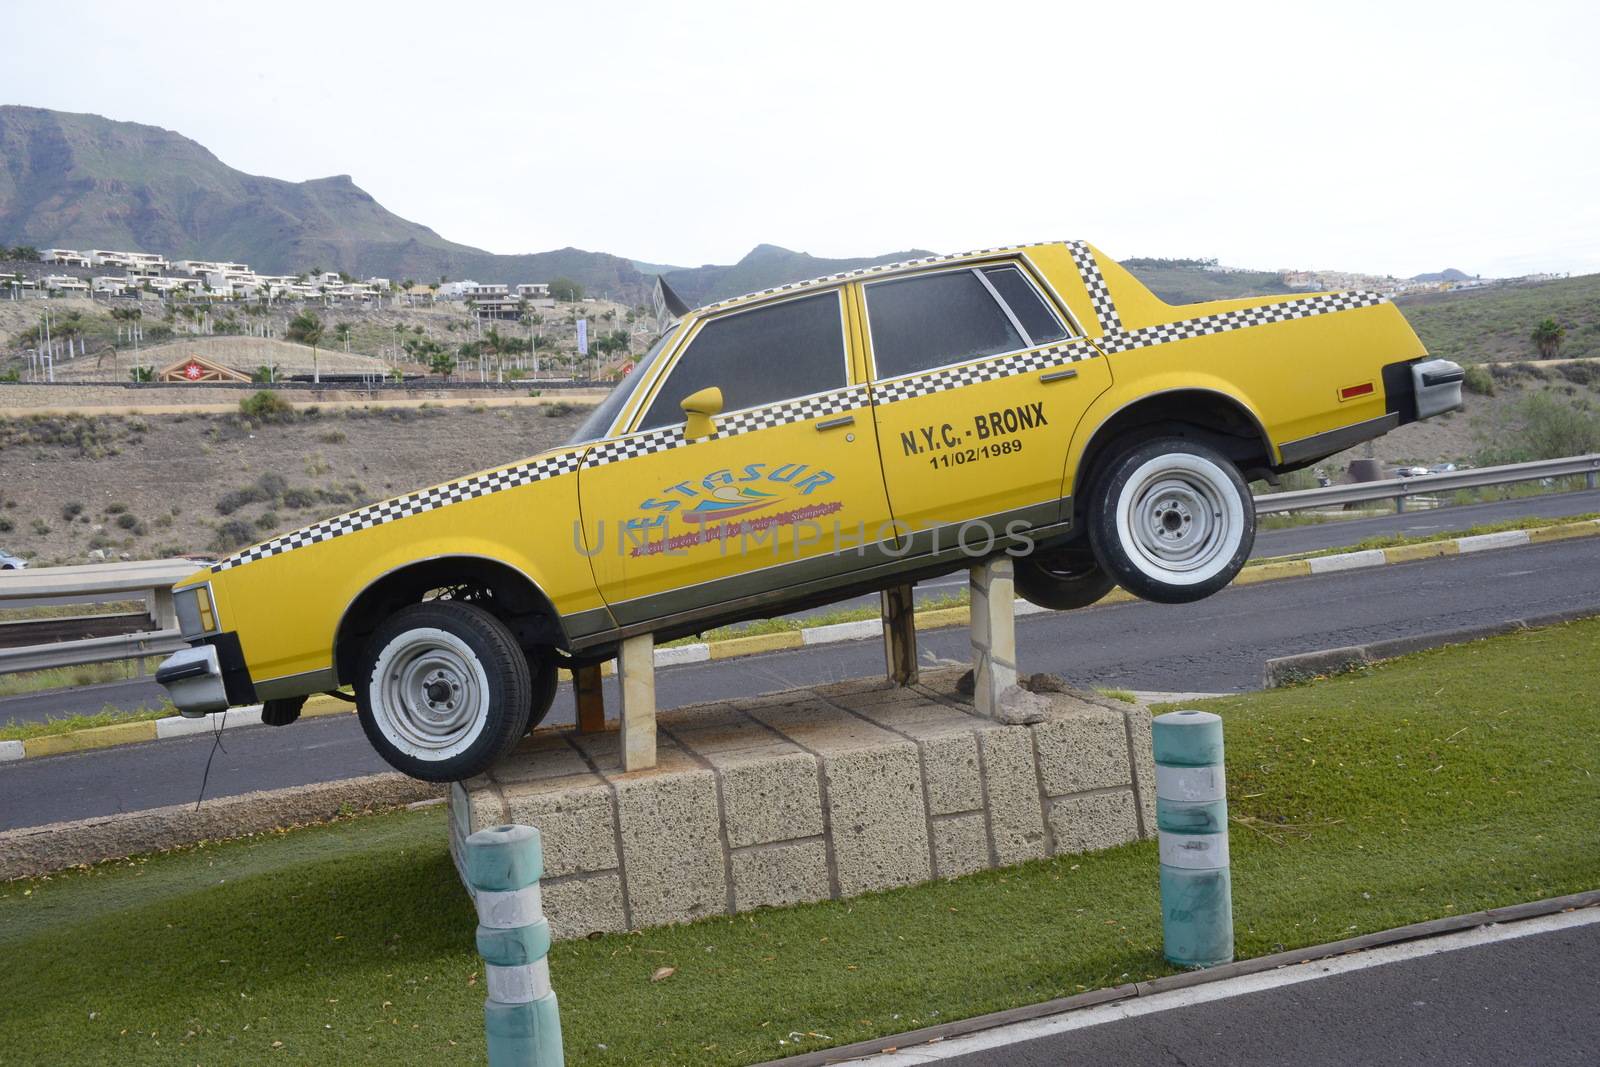 American taxi on stand in Tenerife by gorilla